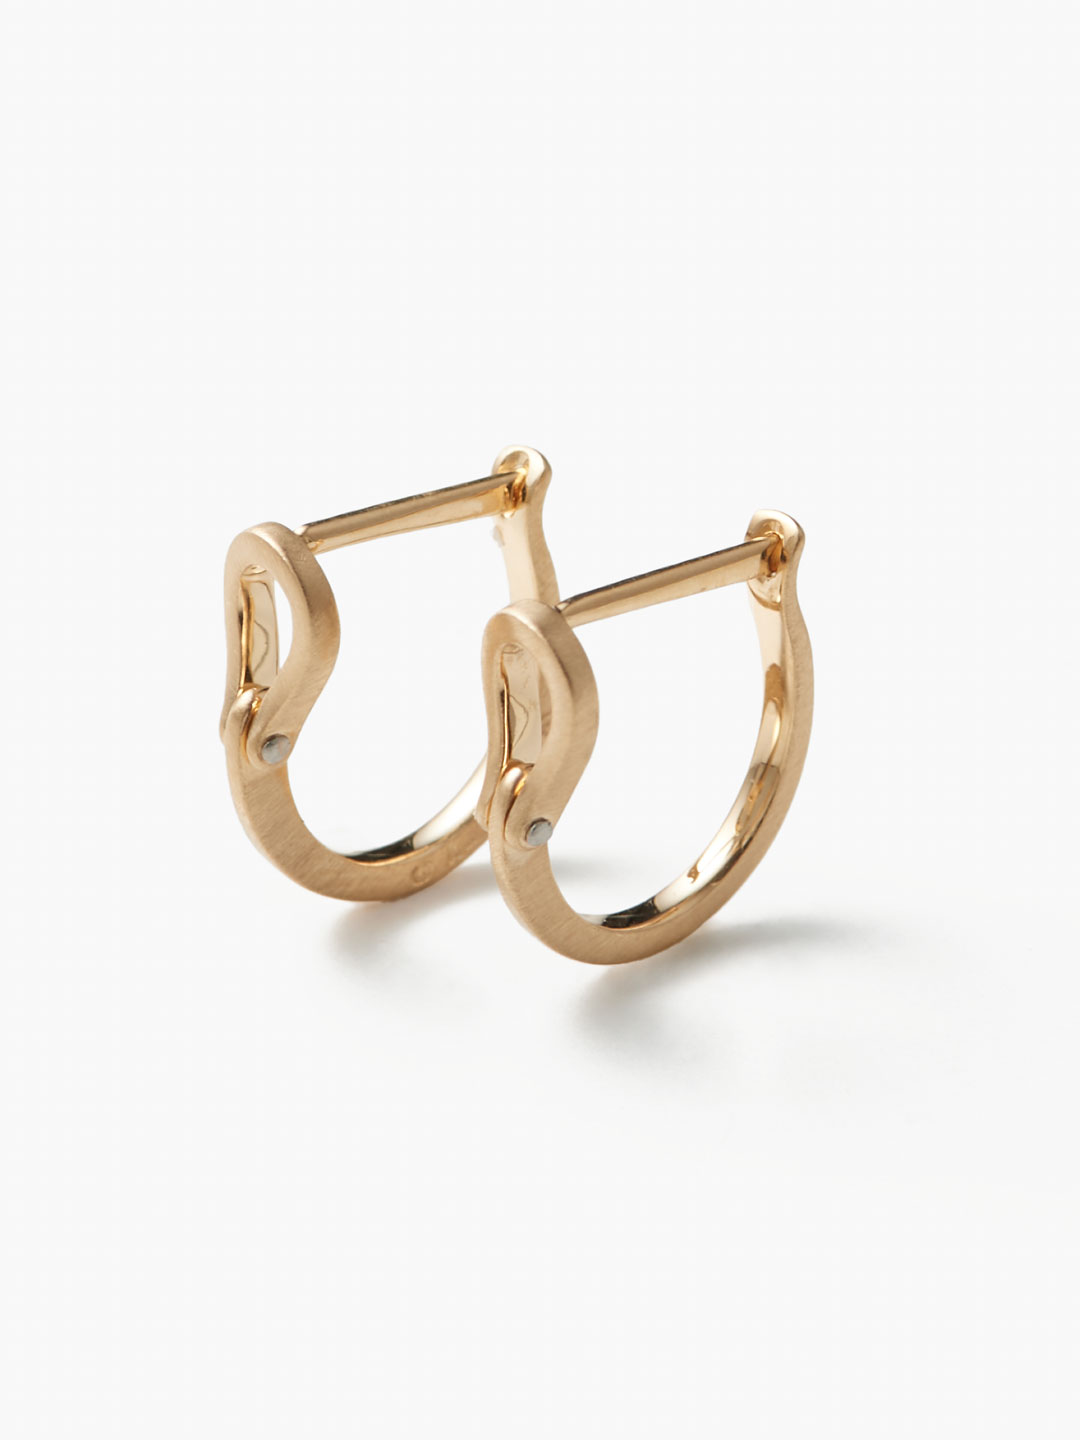 The Symbol Of Refined Metal  Pierced Earrings No dia- Yellow Gold